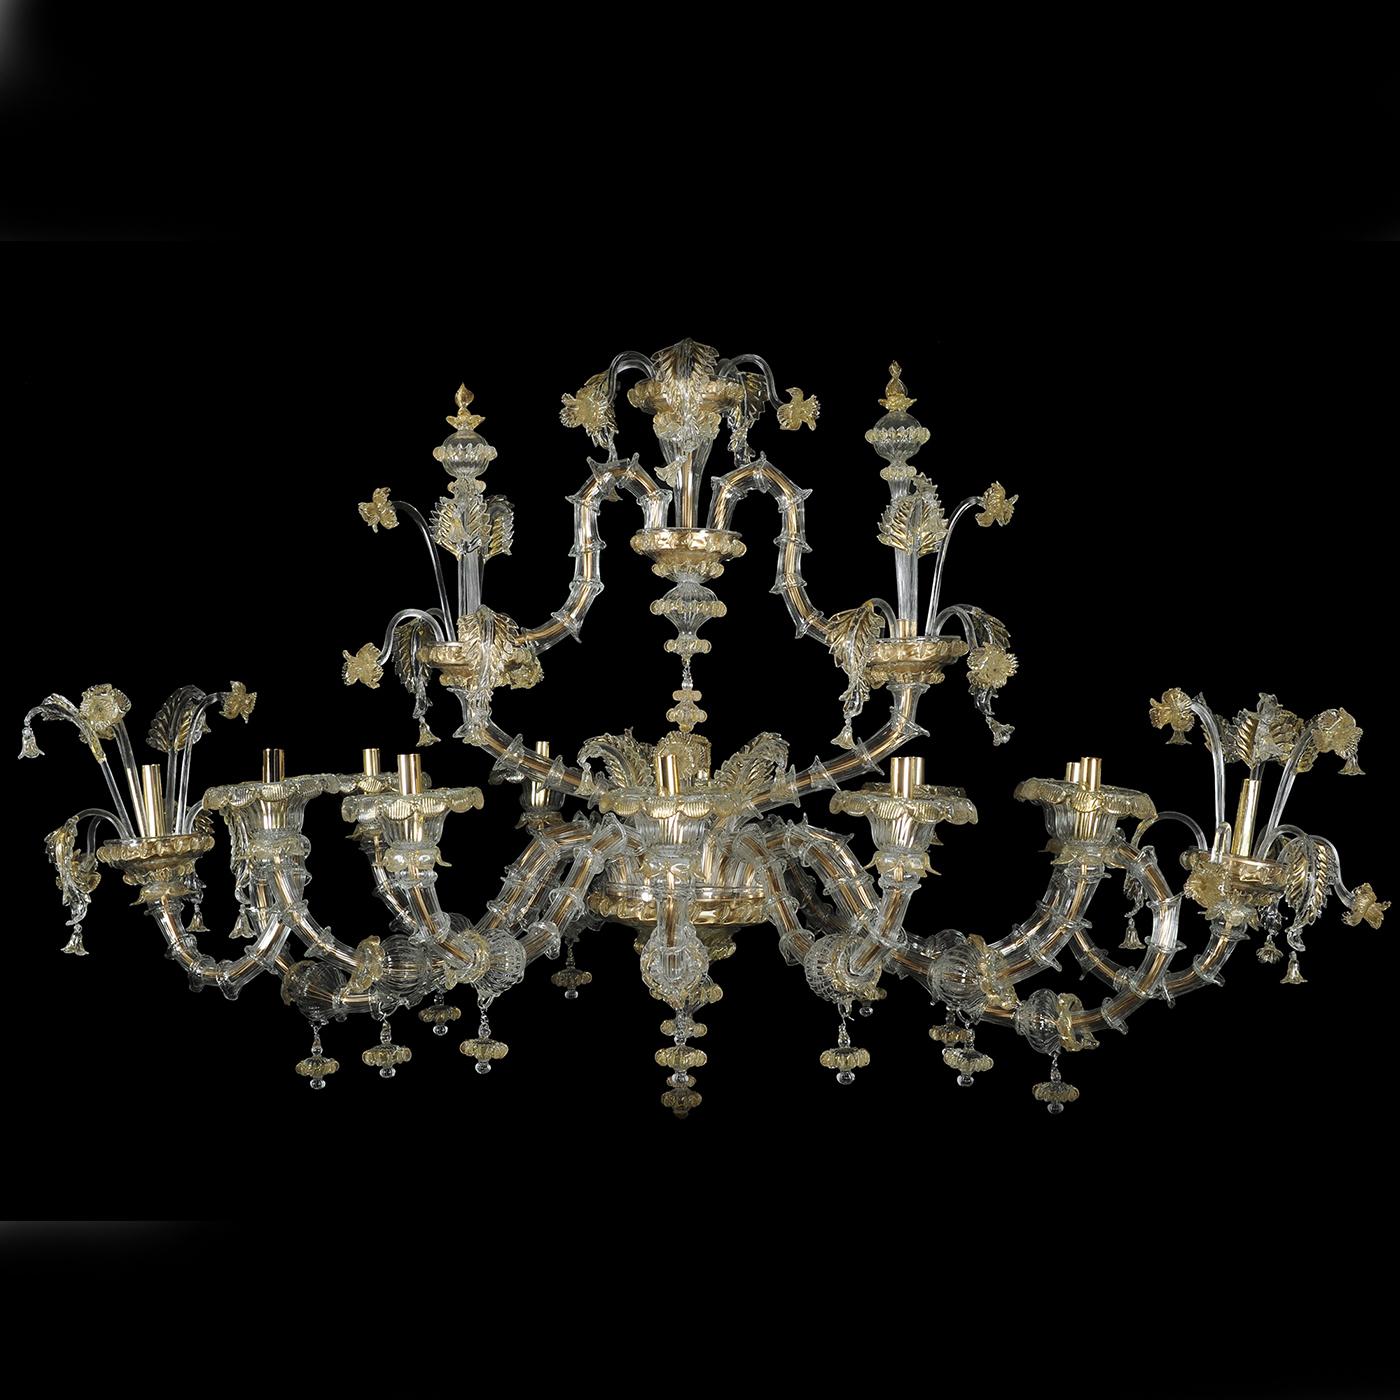 This boat-shaped, XVII century Rezzonico-style chandelier is an utterly precious design piece of bold visual impact. Exquisitely refined in its choice of shapes and finishes, it is masterfully handcrafted of mouth-clown Murano glass by expert